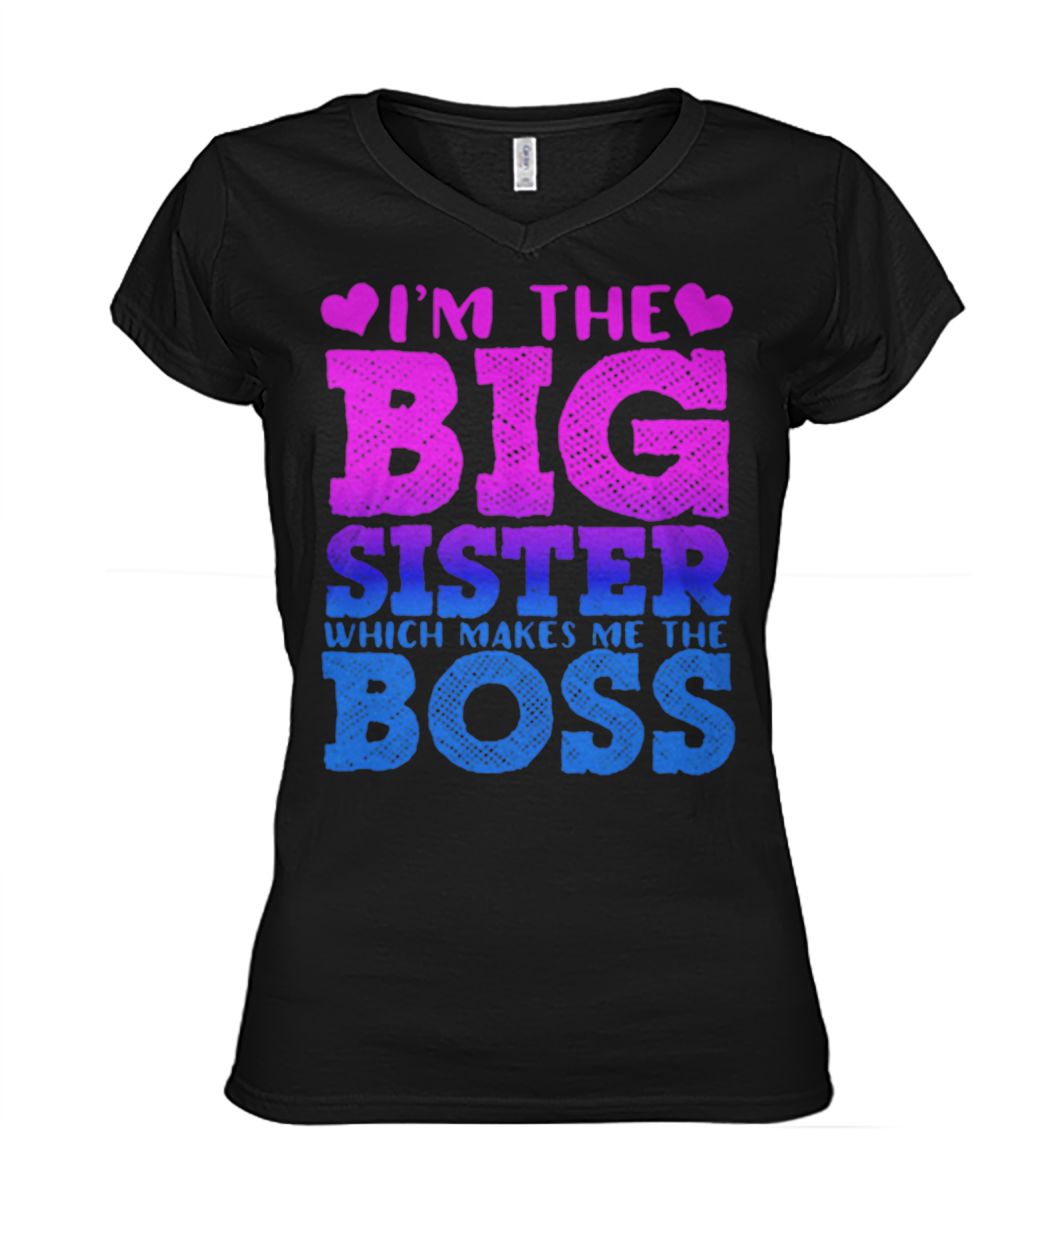 I'm the big sister which makes me boss women's v-neck